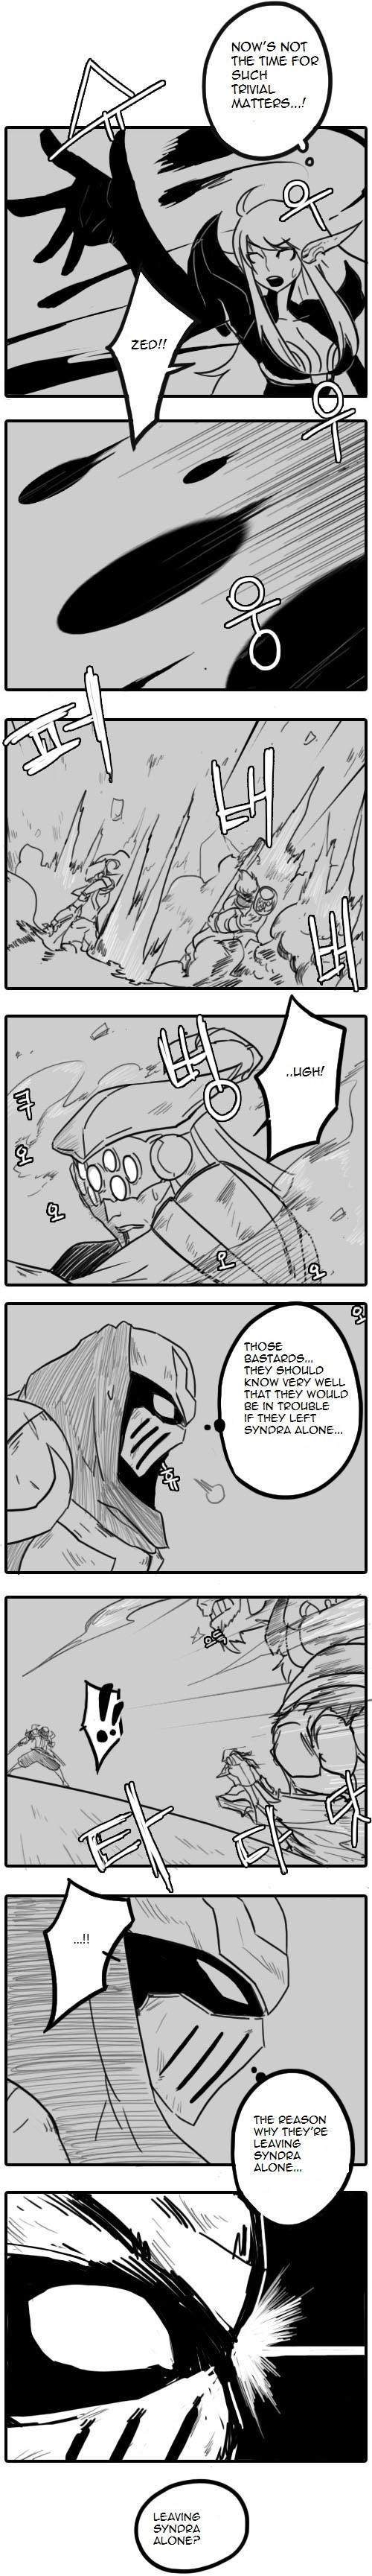 League of Legends Syndra & Zed's Everyday Life (Doujinshi) Vol. 1 Ch. 11